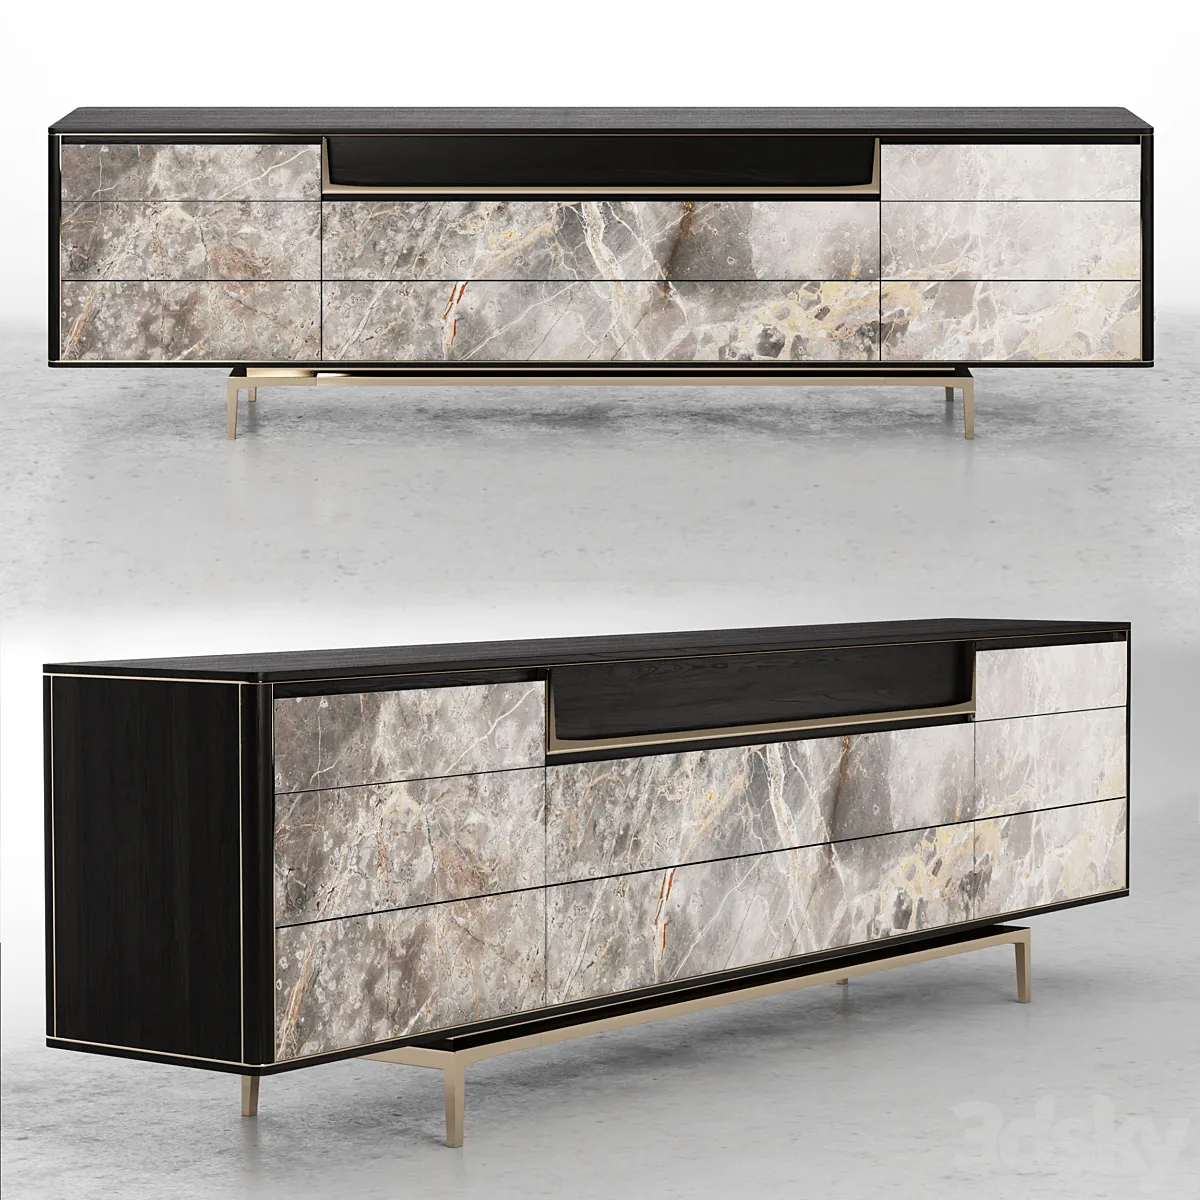 3dsky - Visionnaire BARNEY Lacquered sideboard